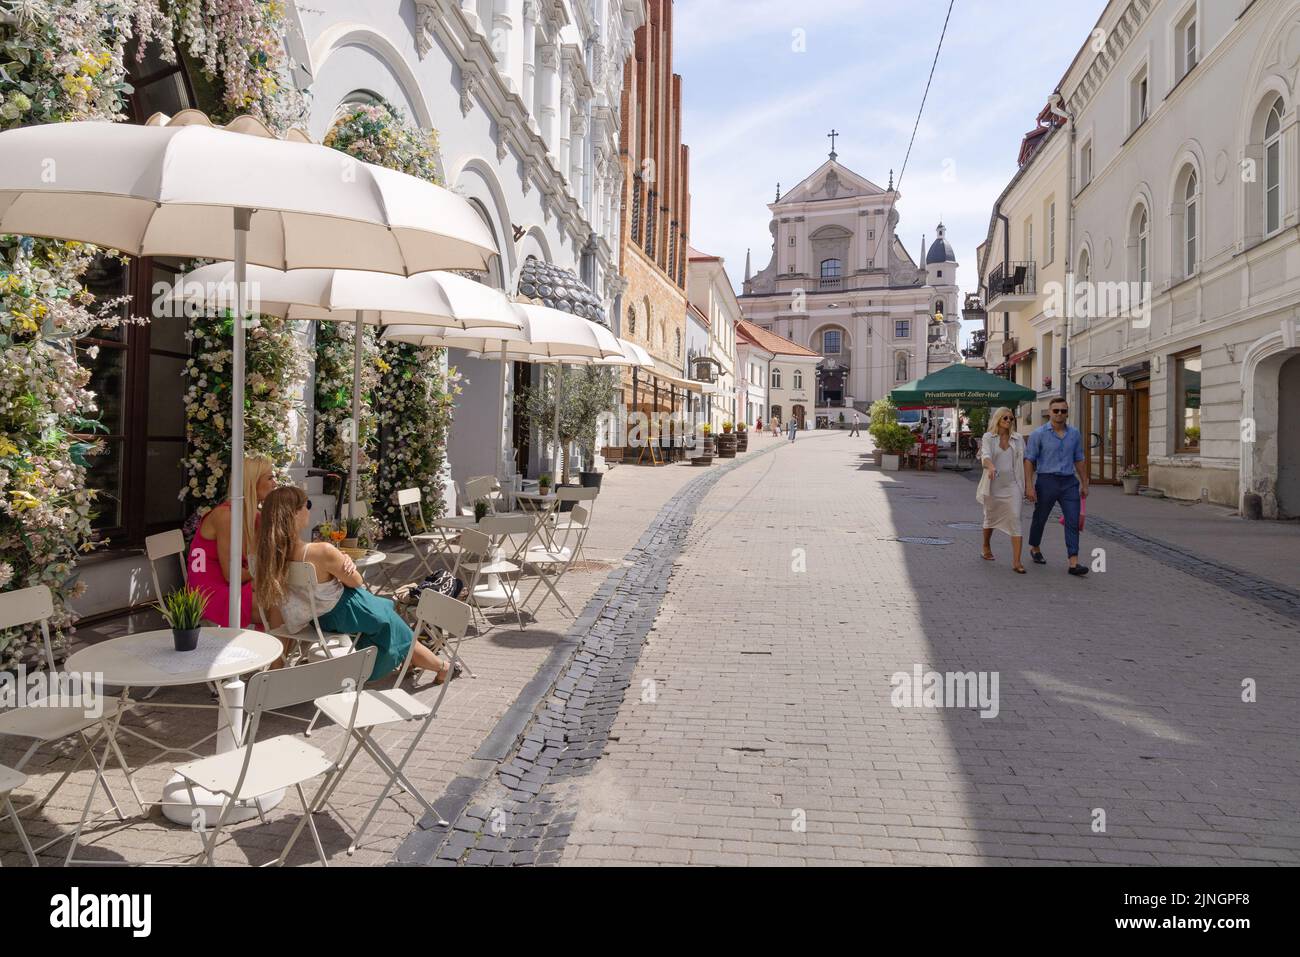 Lithuania travel; Vilnius Old Town street scene with the Church of St Theresa and people at a cafe; Vilnius, Lithuania Europe Stock Photo